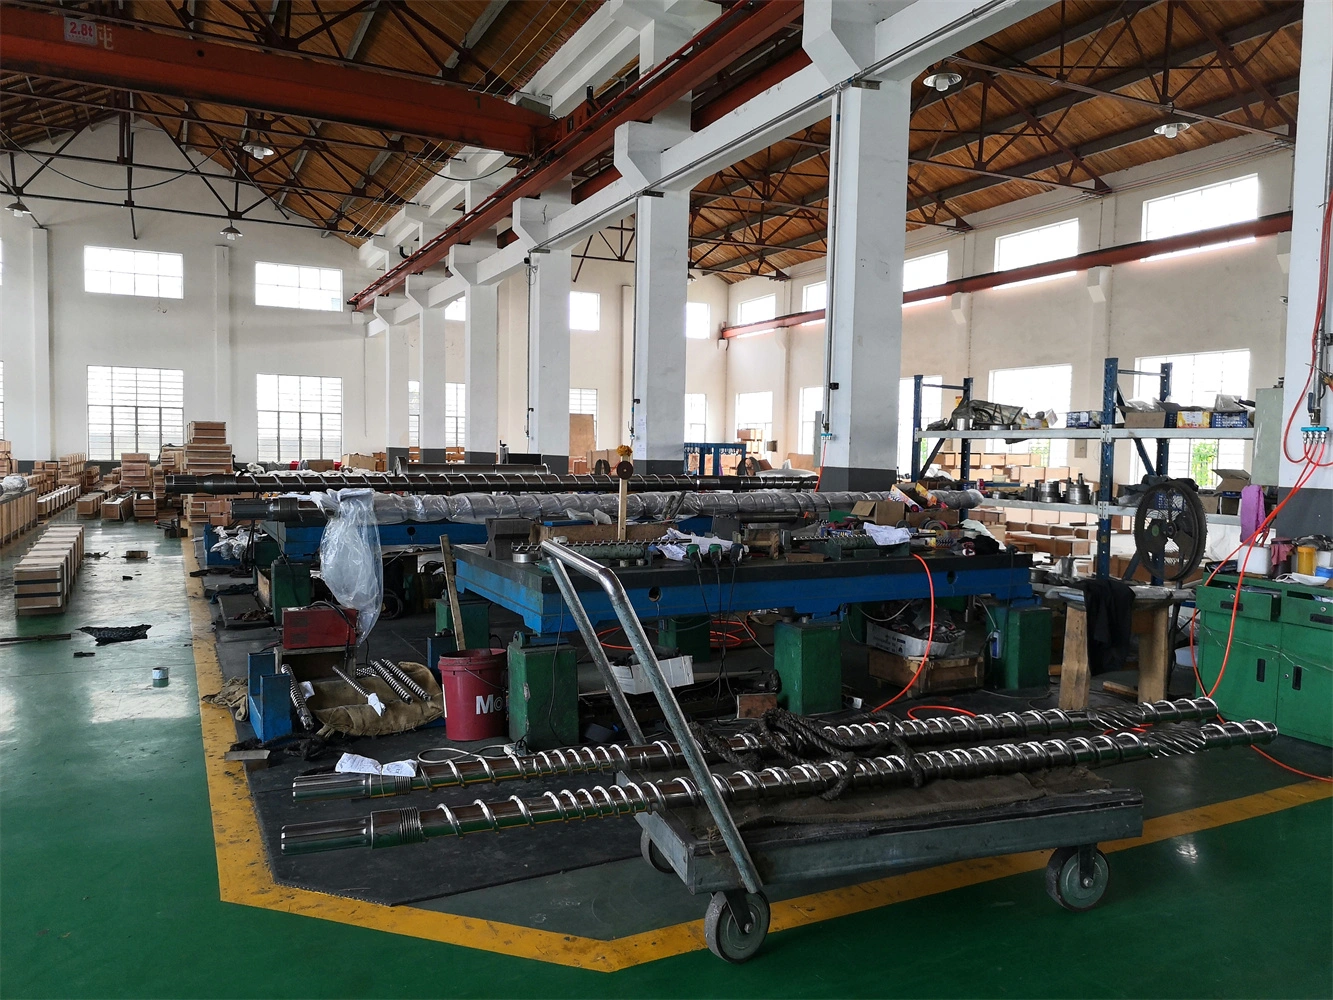 plastic feed screw, E.J.S INDUSTRY CO., LTD is producing day in and day out for customers worldwide in plastics industry from OEM machine builders to end users.